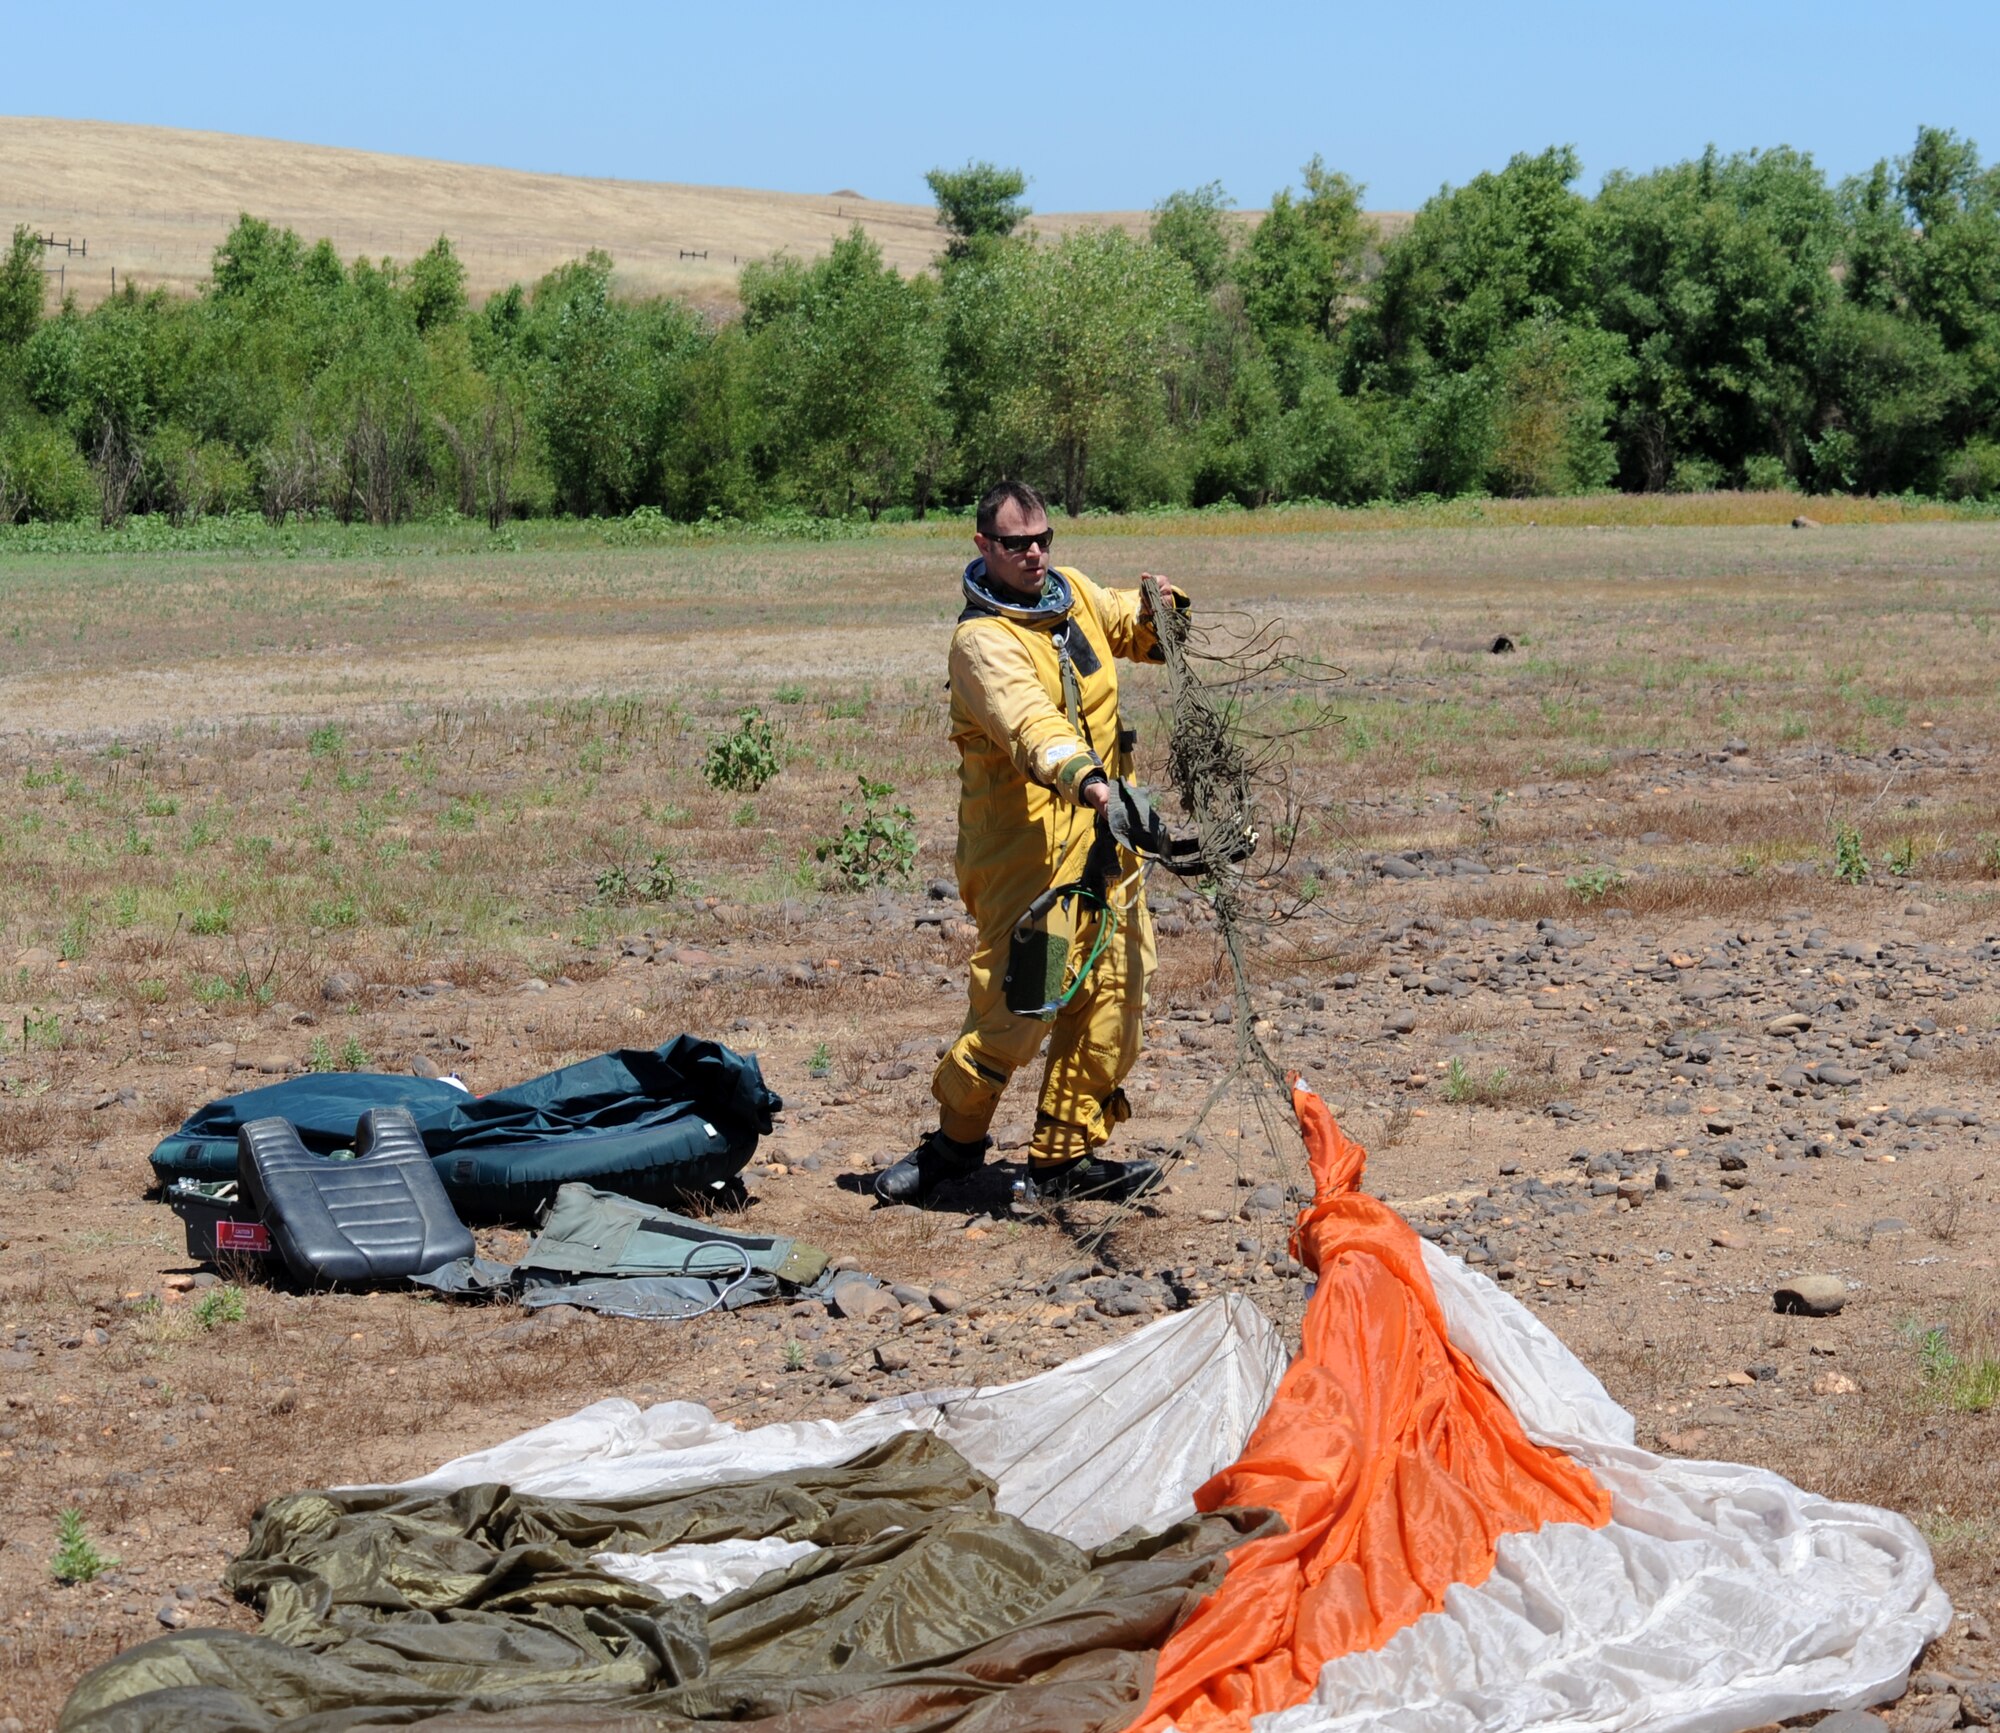 A U-2 pilot gathers his parachute during a combat search and rescue exercise at Beale Air Force Base, Calif., May 31, 2013. U-2 pilots must wear specialized pressure suits to fly at high altitudes. (U.S. Air Force photo by Sean Bhakta/Released)